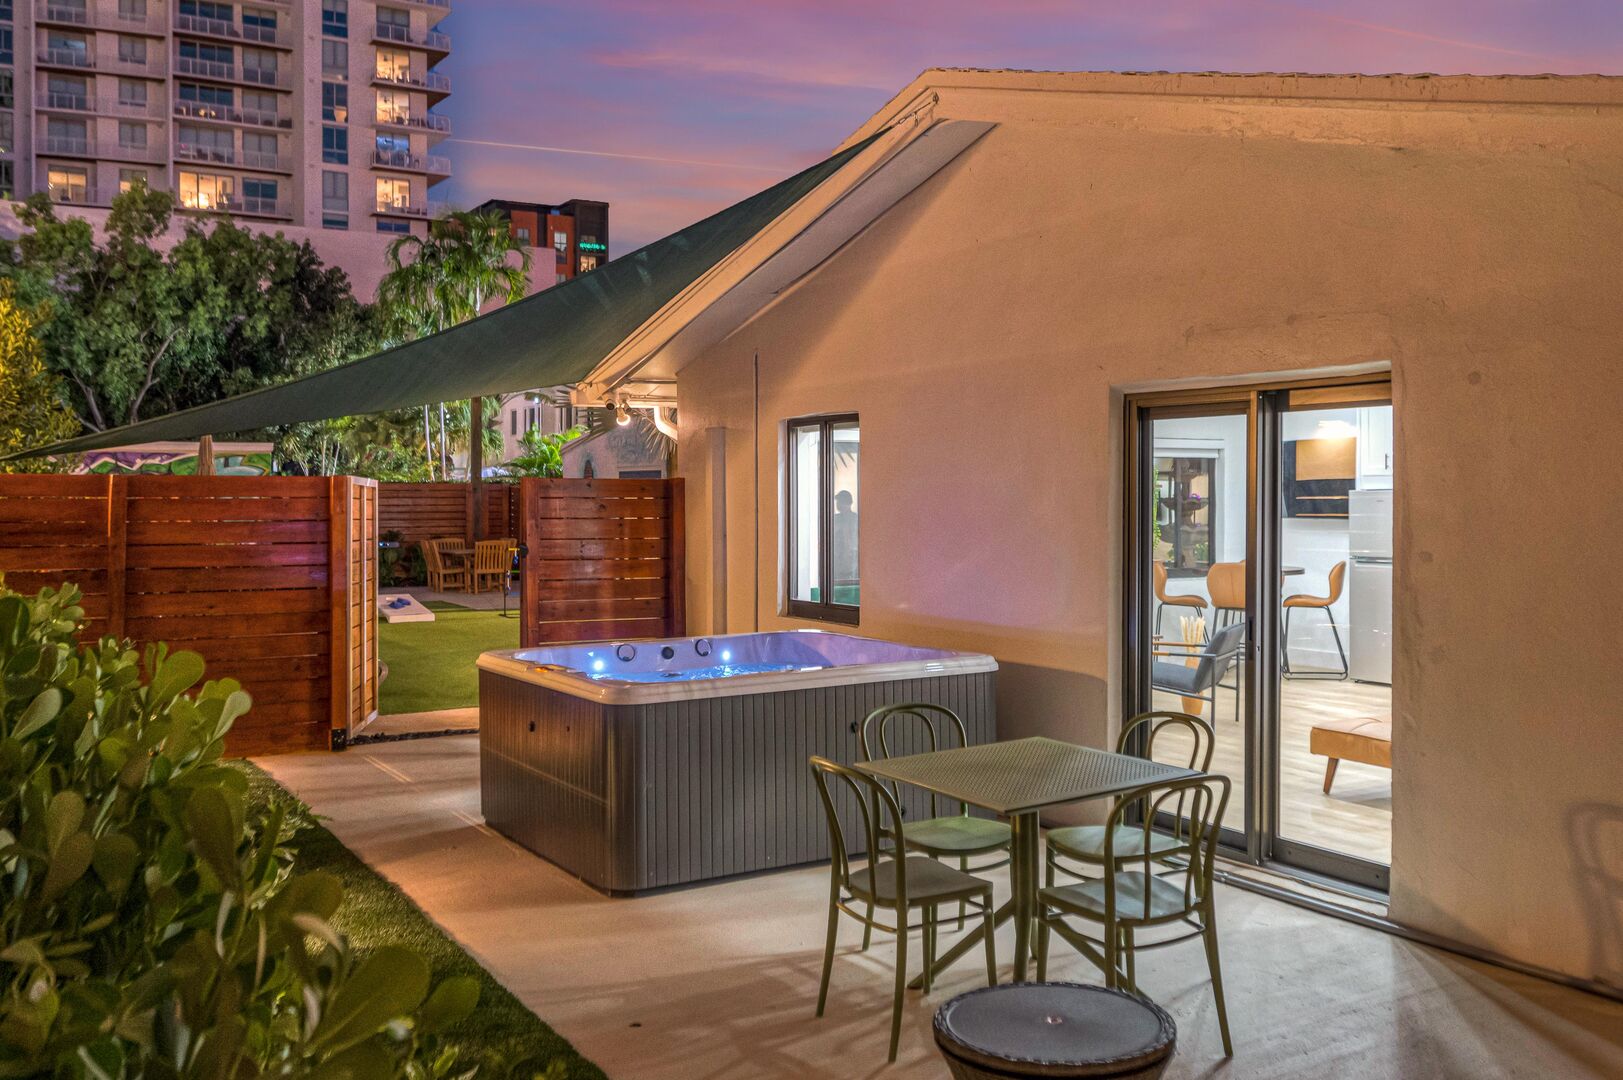 The backyard and seating area by the hot tub is private to Suite Seven.